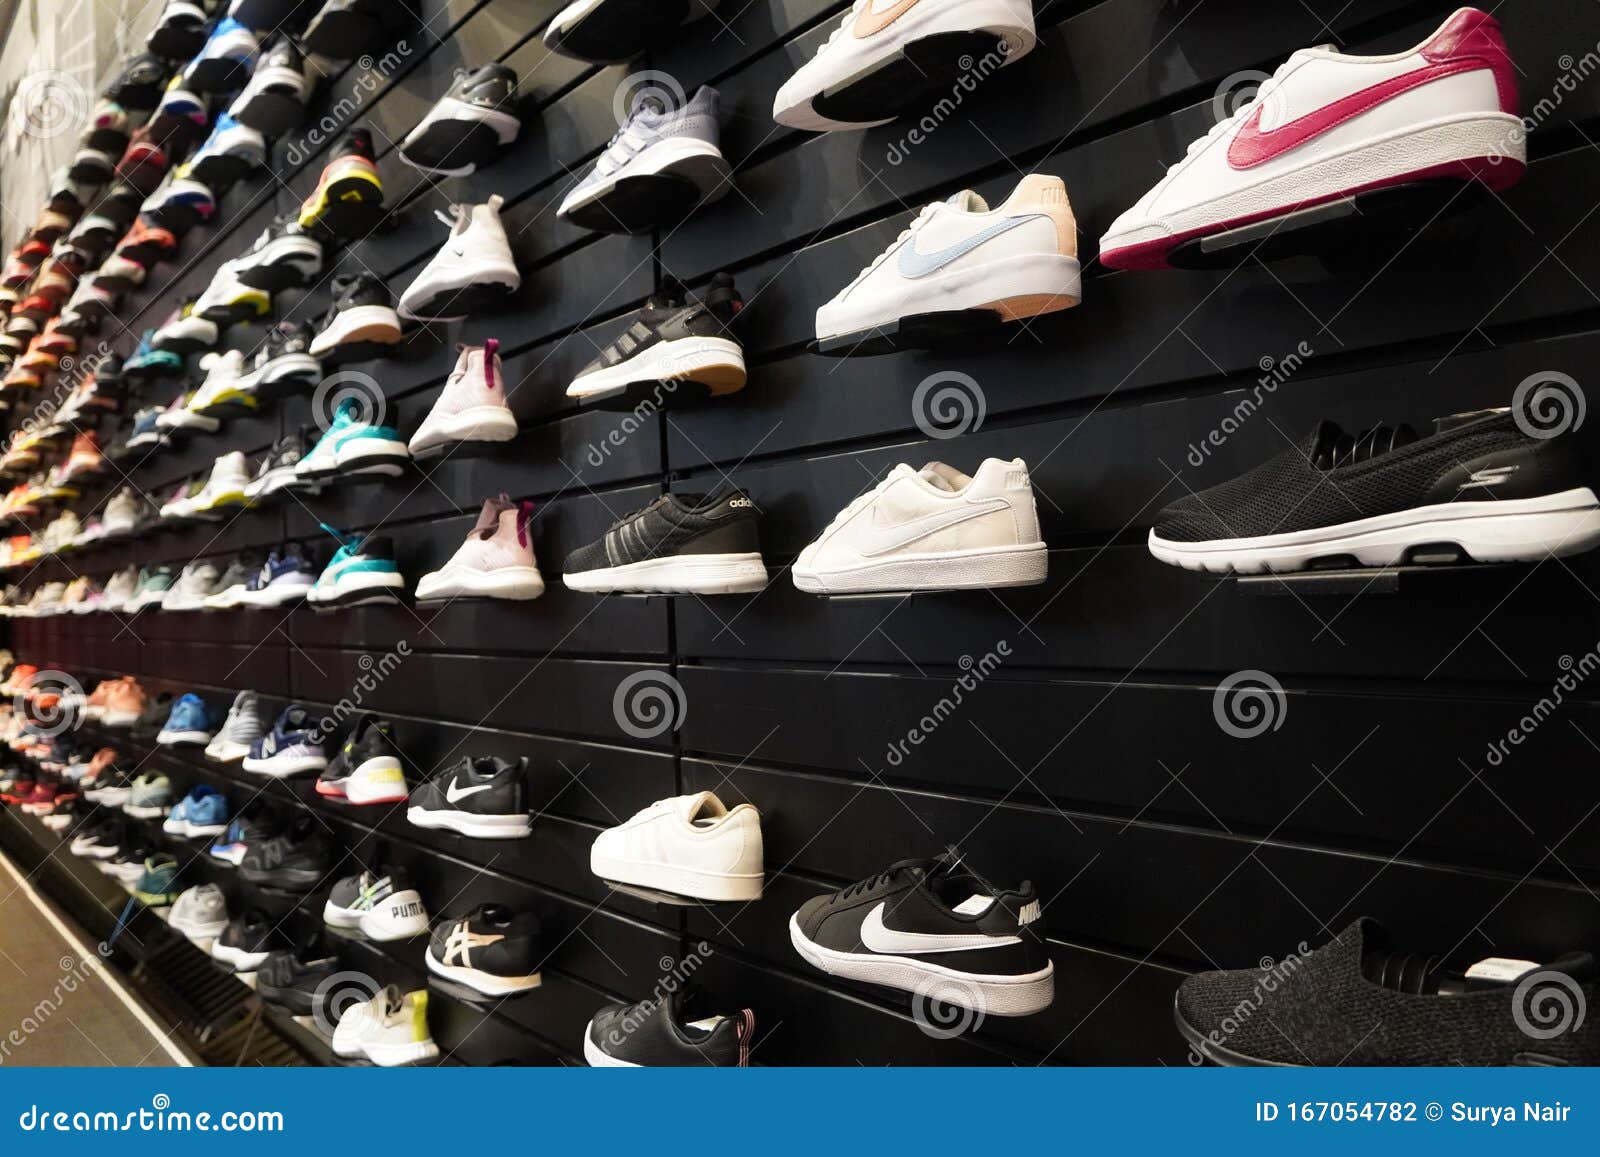 Shop Display of a Lot of Sports Shoes on a Wall. a View of a Wall of ...